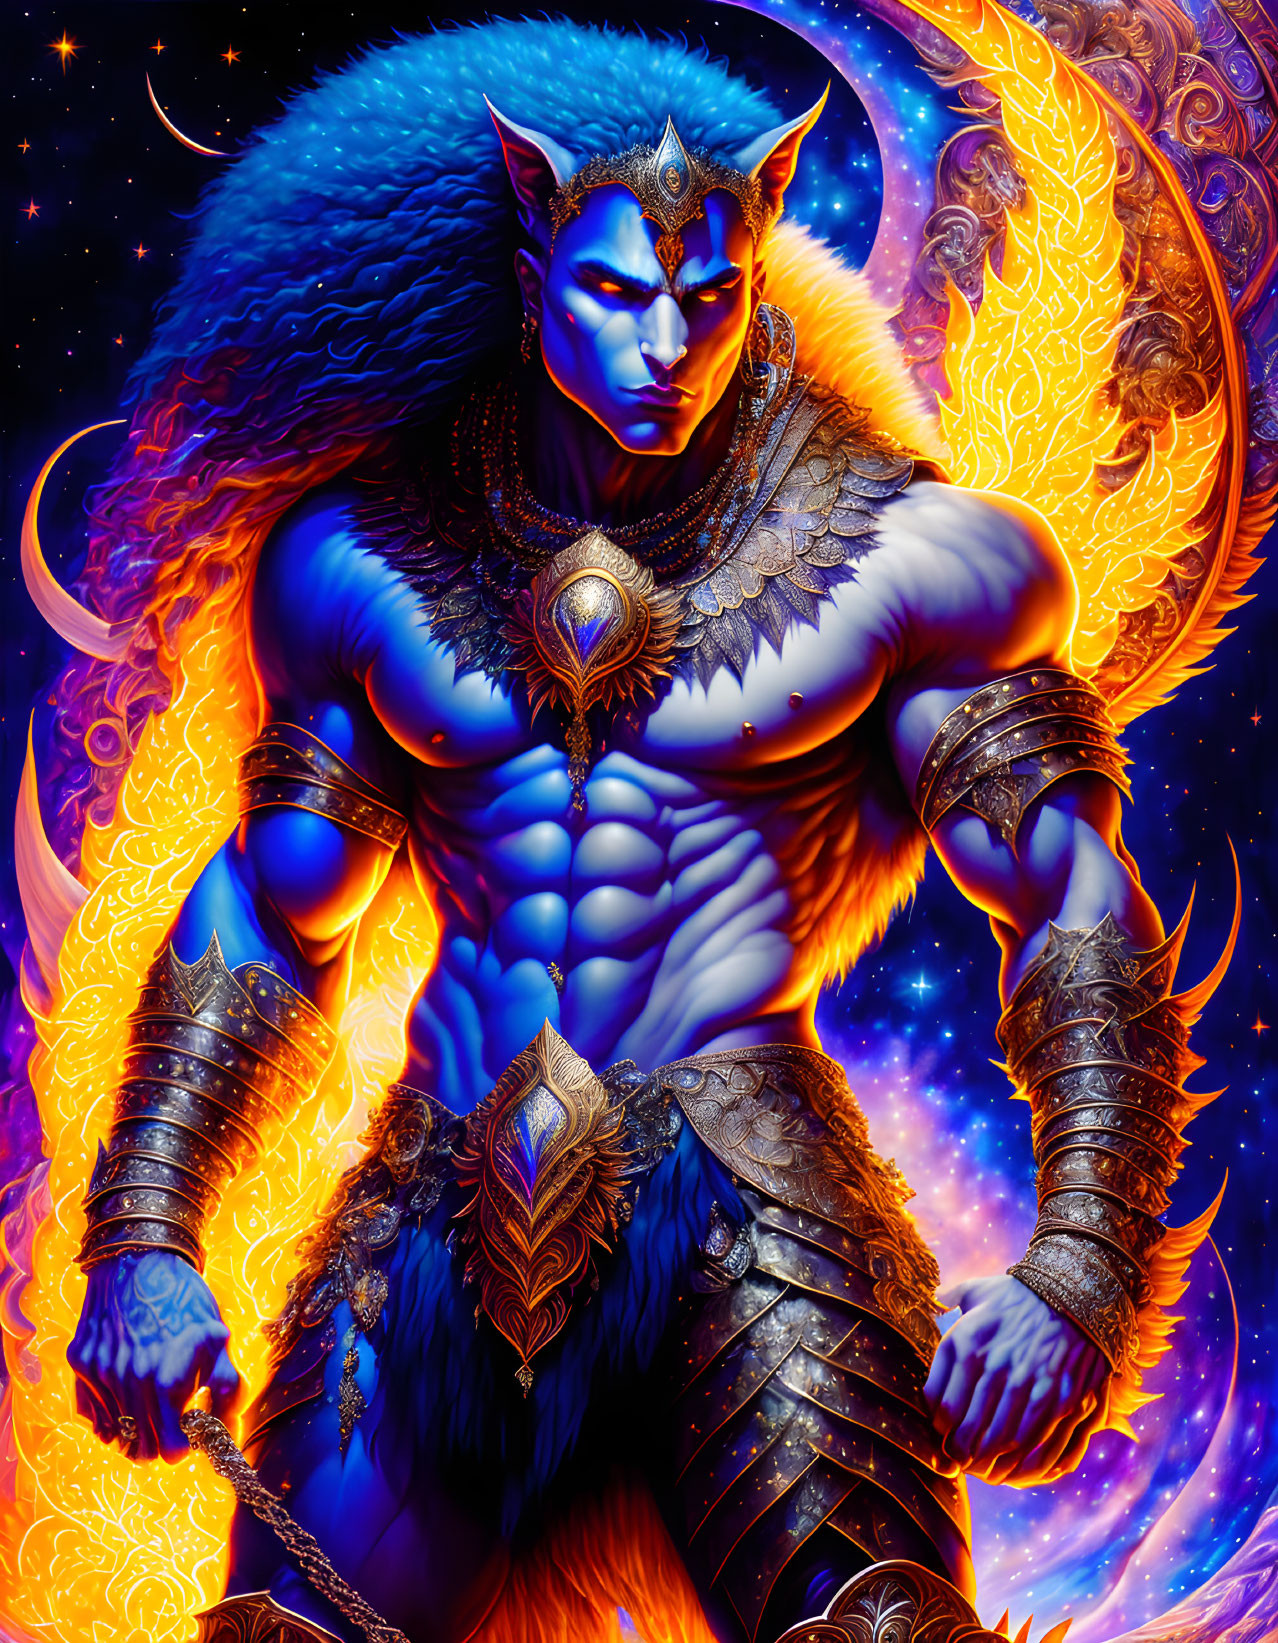 Blue-skinned humanoid with wolf features in ornate armor on fiery orange background